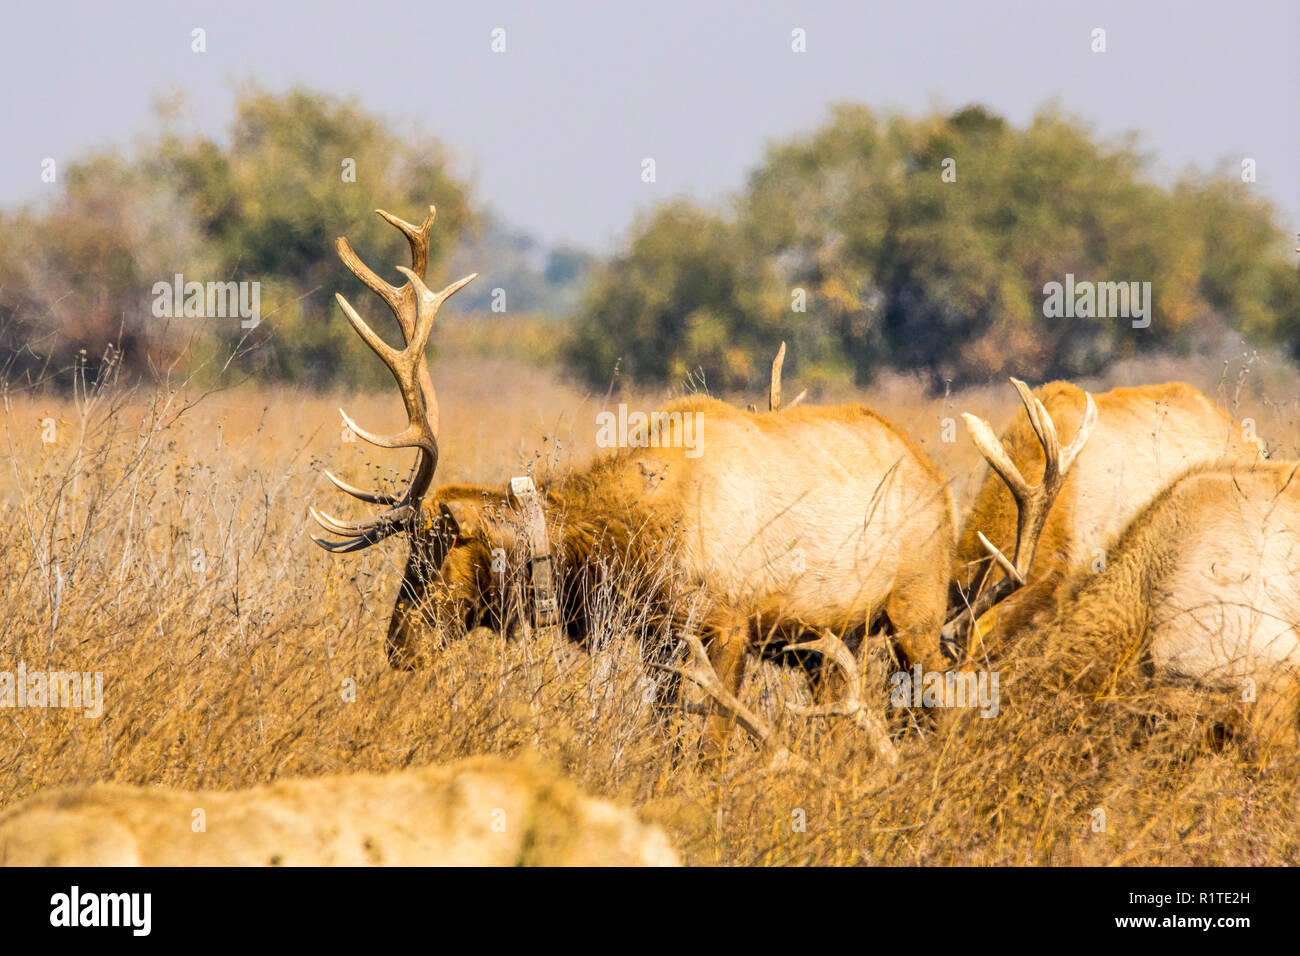 A Bull elk with a Tracking Collar at the San Luis National Wildlife refuge in The California Central Valley Stock Photo